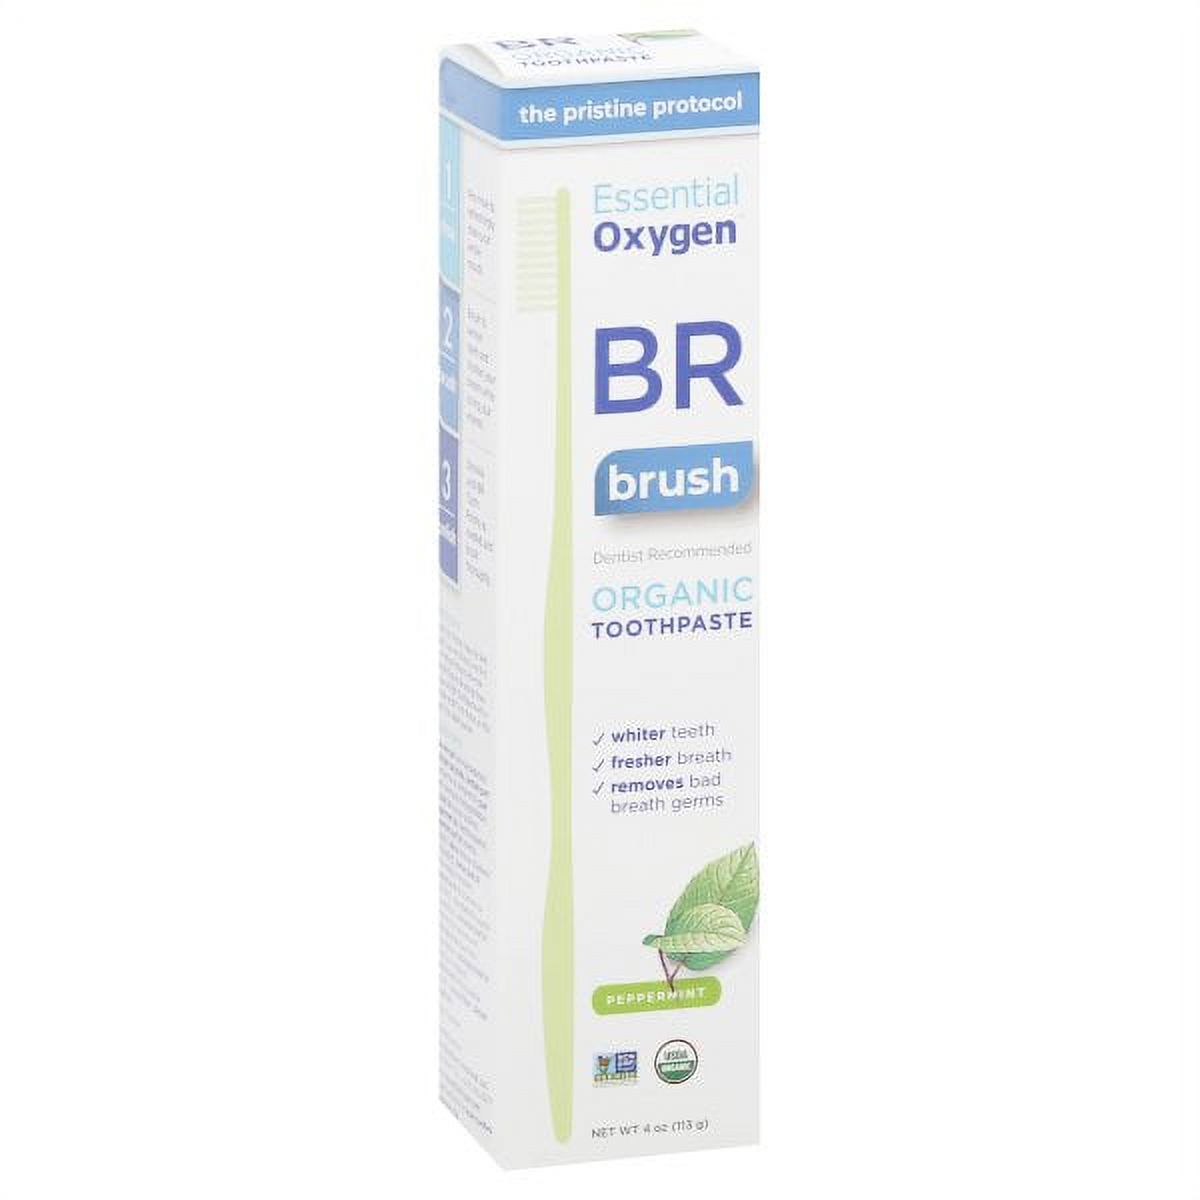 Essential Oxygen BR Organic Toothpaste Peppermint, 4 oz - image 1 of 2